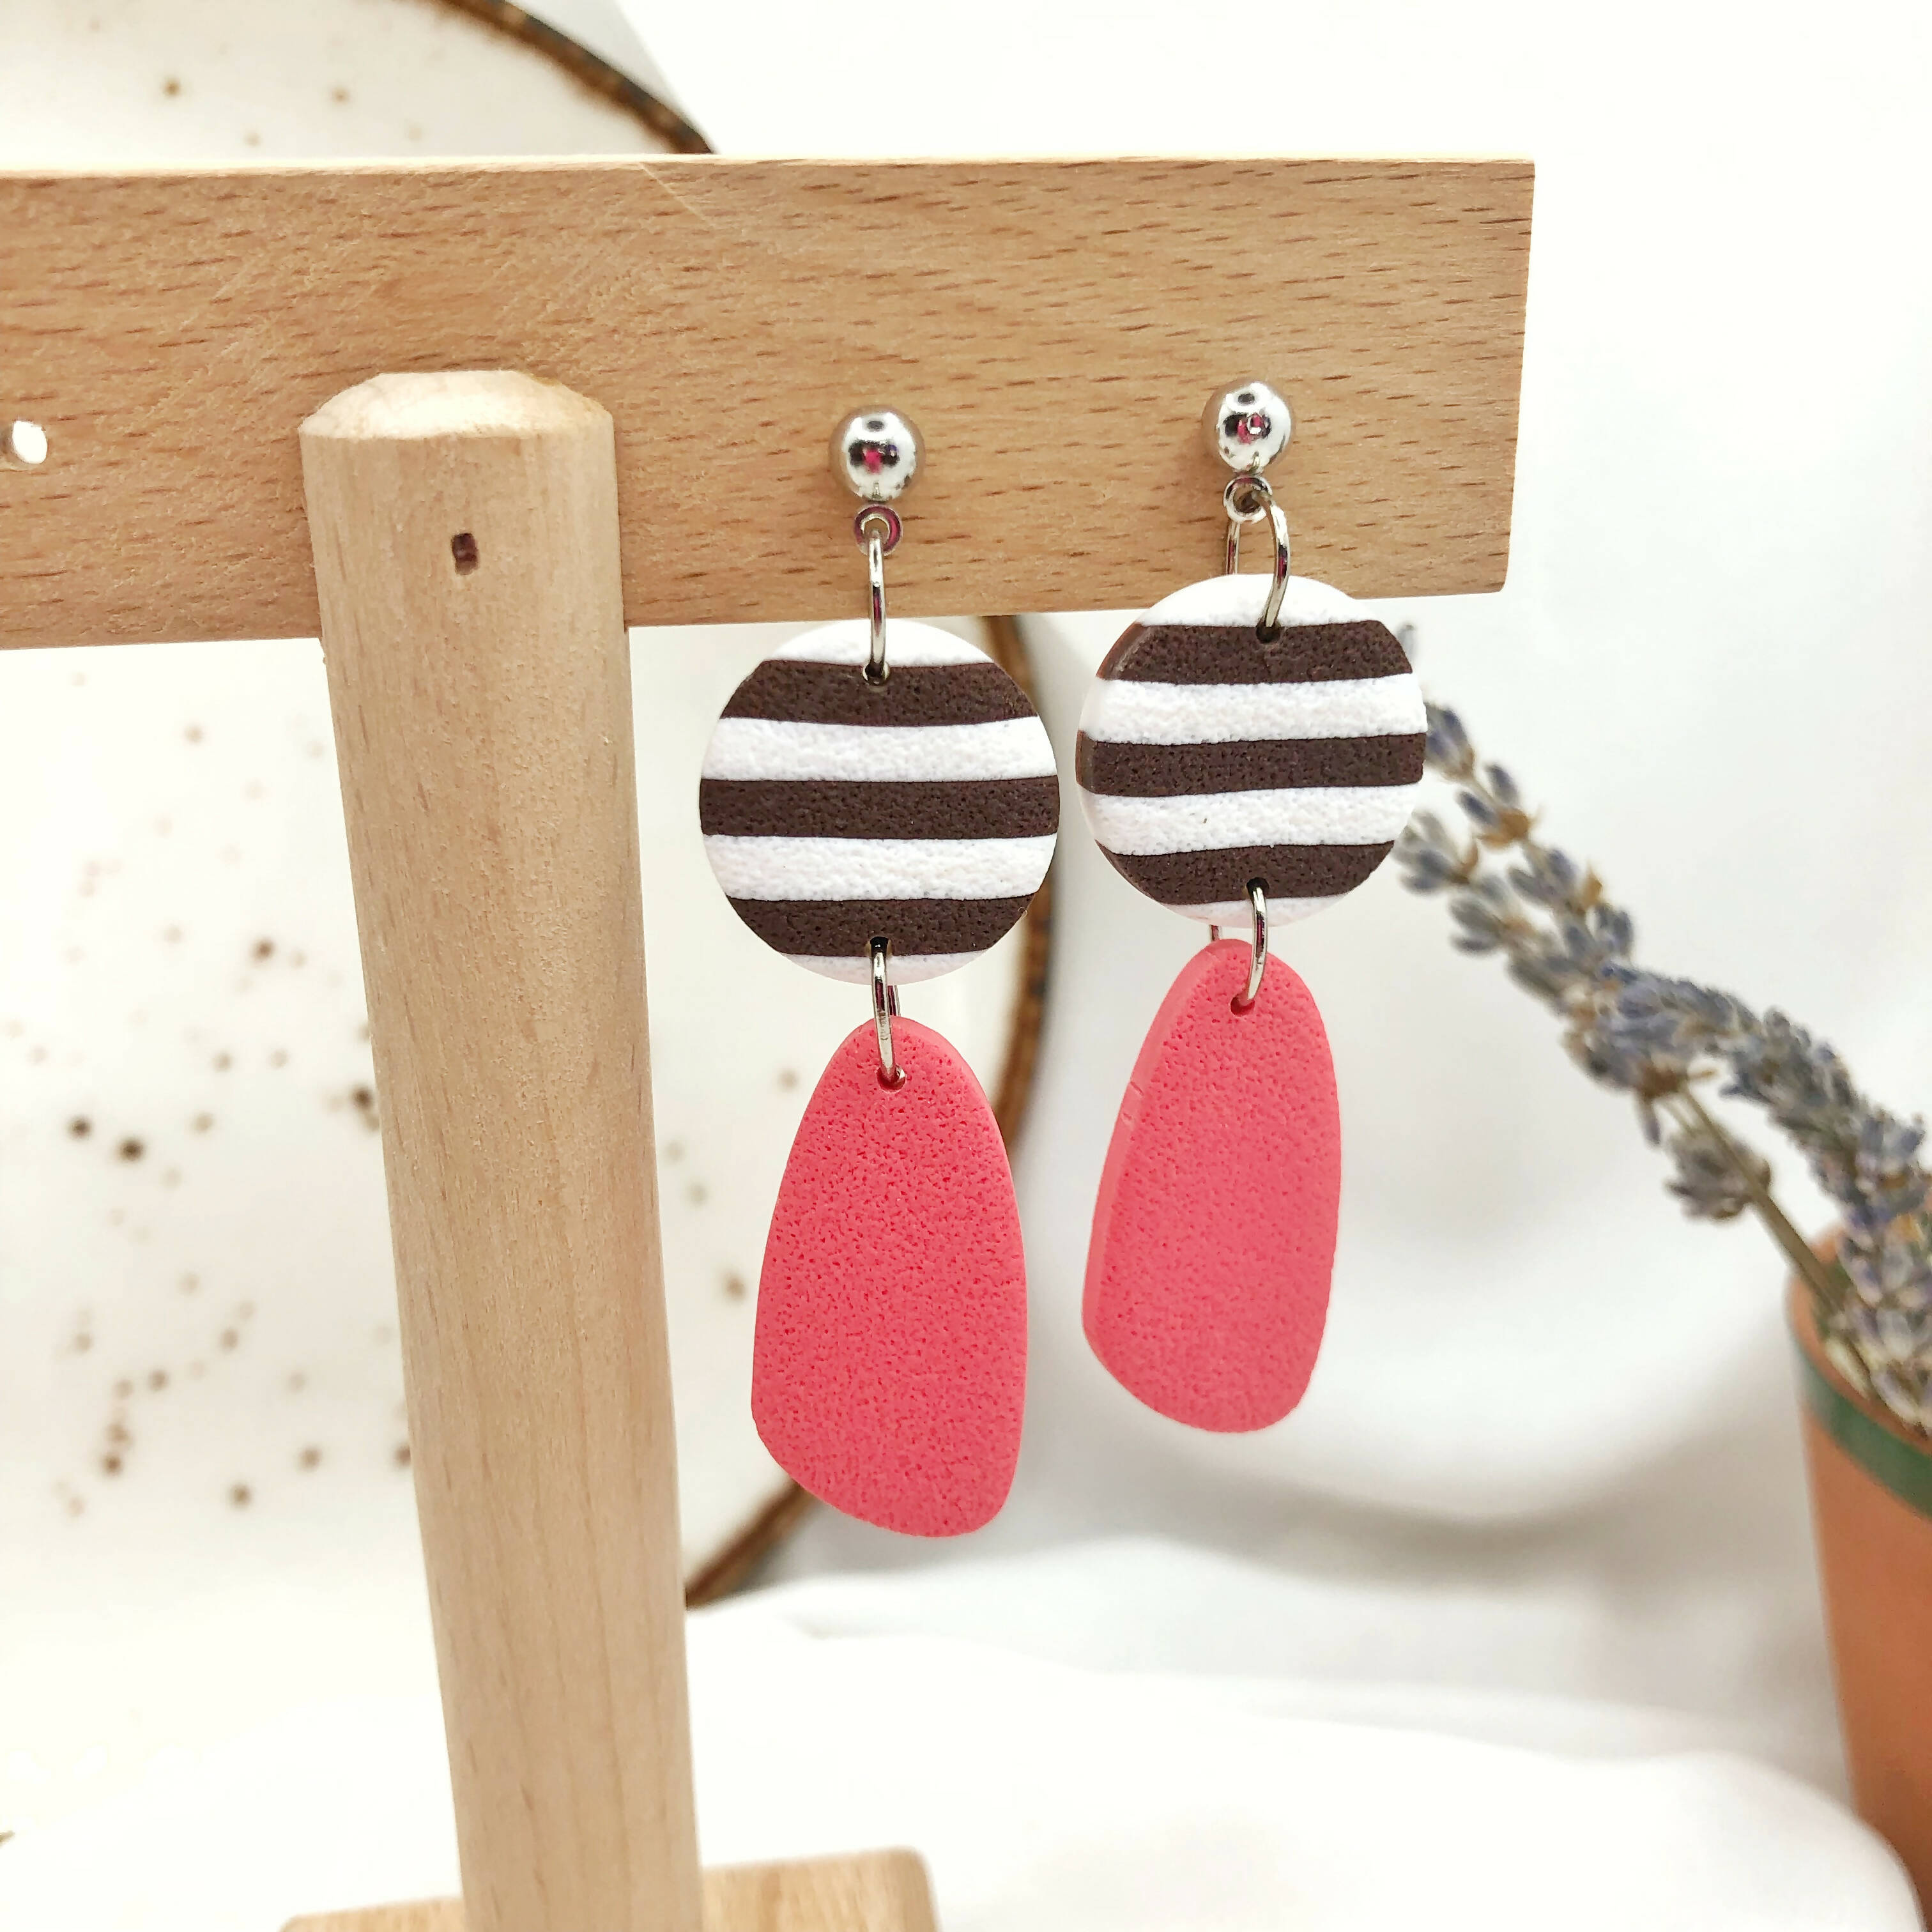 Women's Stylish Earrings, Hand Crafted Polymer Clay Earrings, Nickel Free Women's Earrings - Wear Sierra